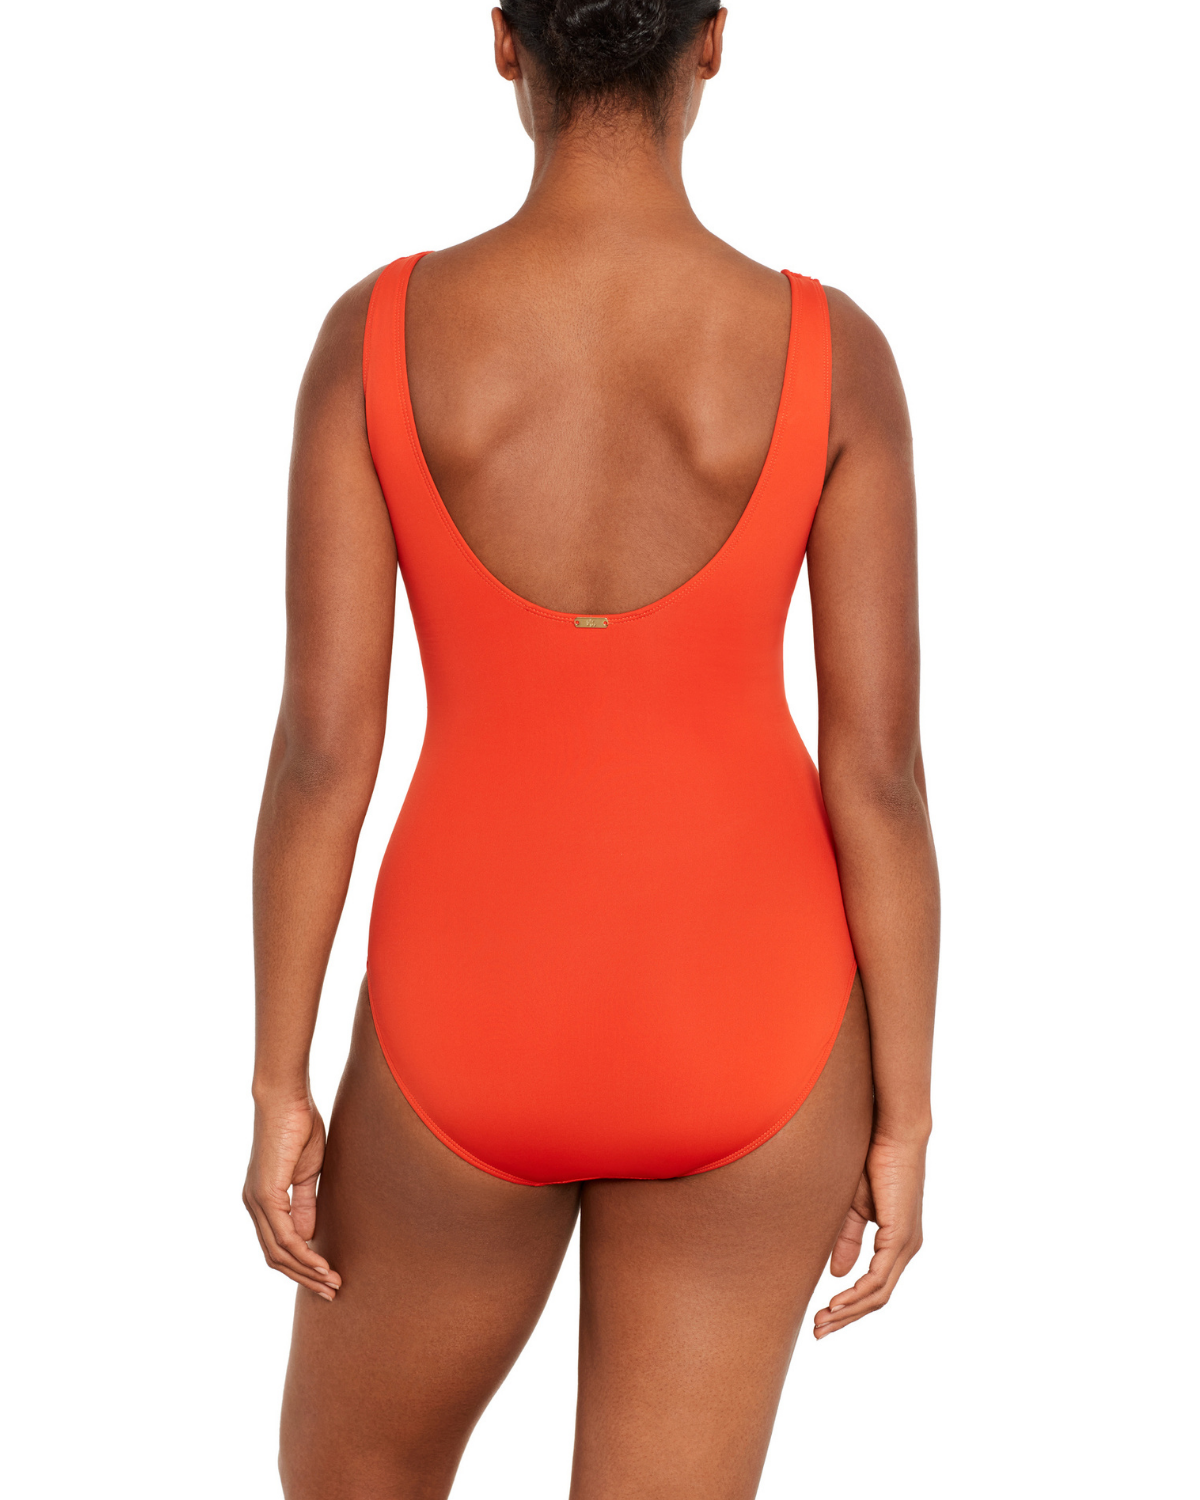 Model wearing a v-neck one piece with a ruffle trim and shirred panel around the torso in orange